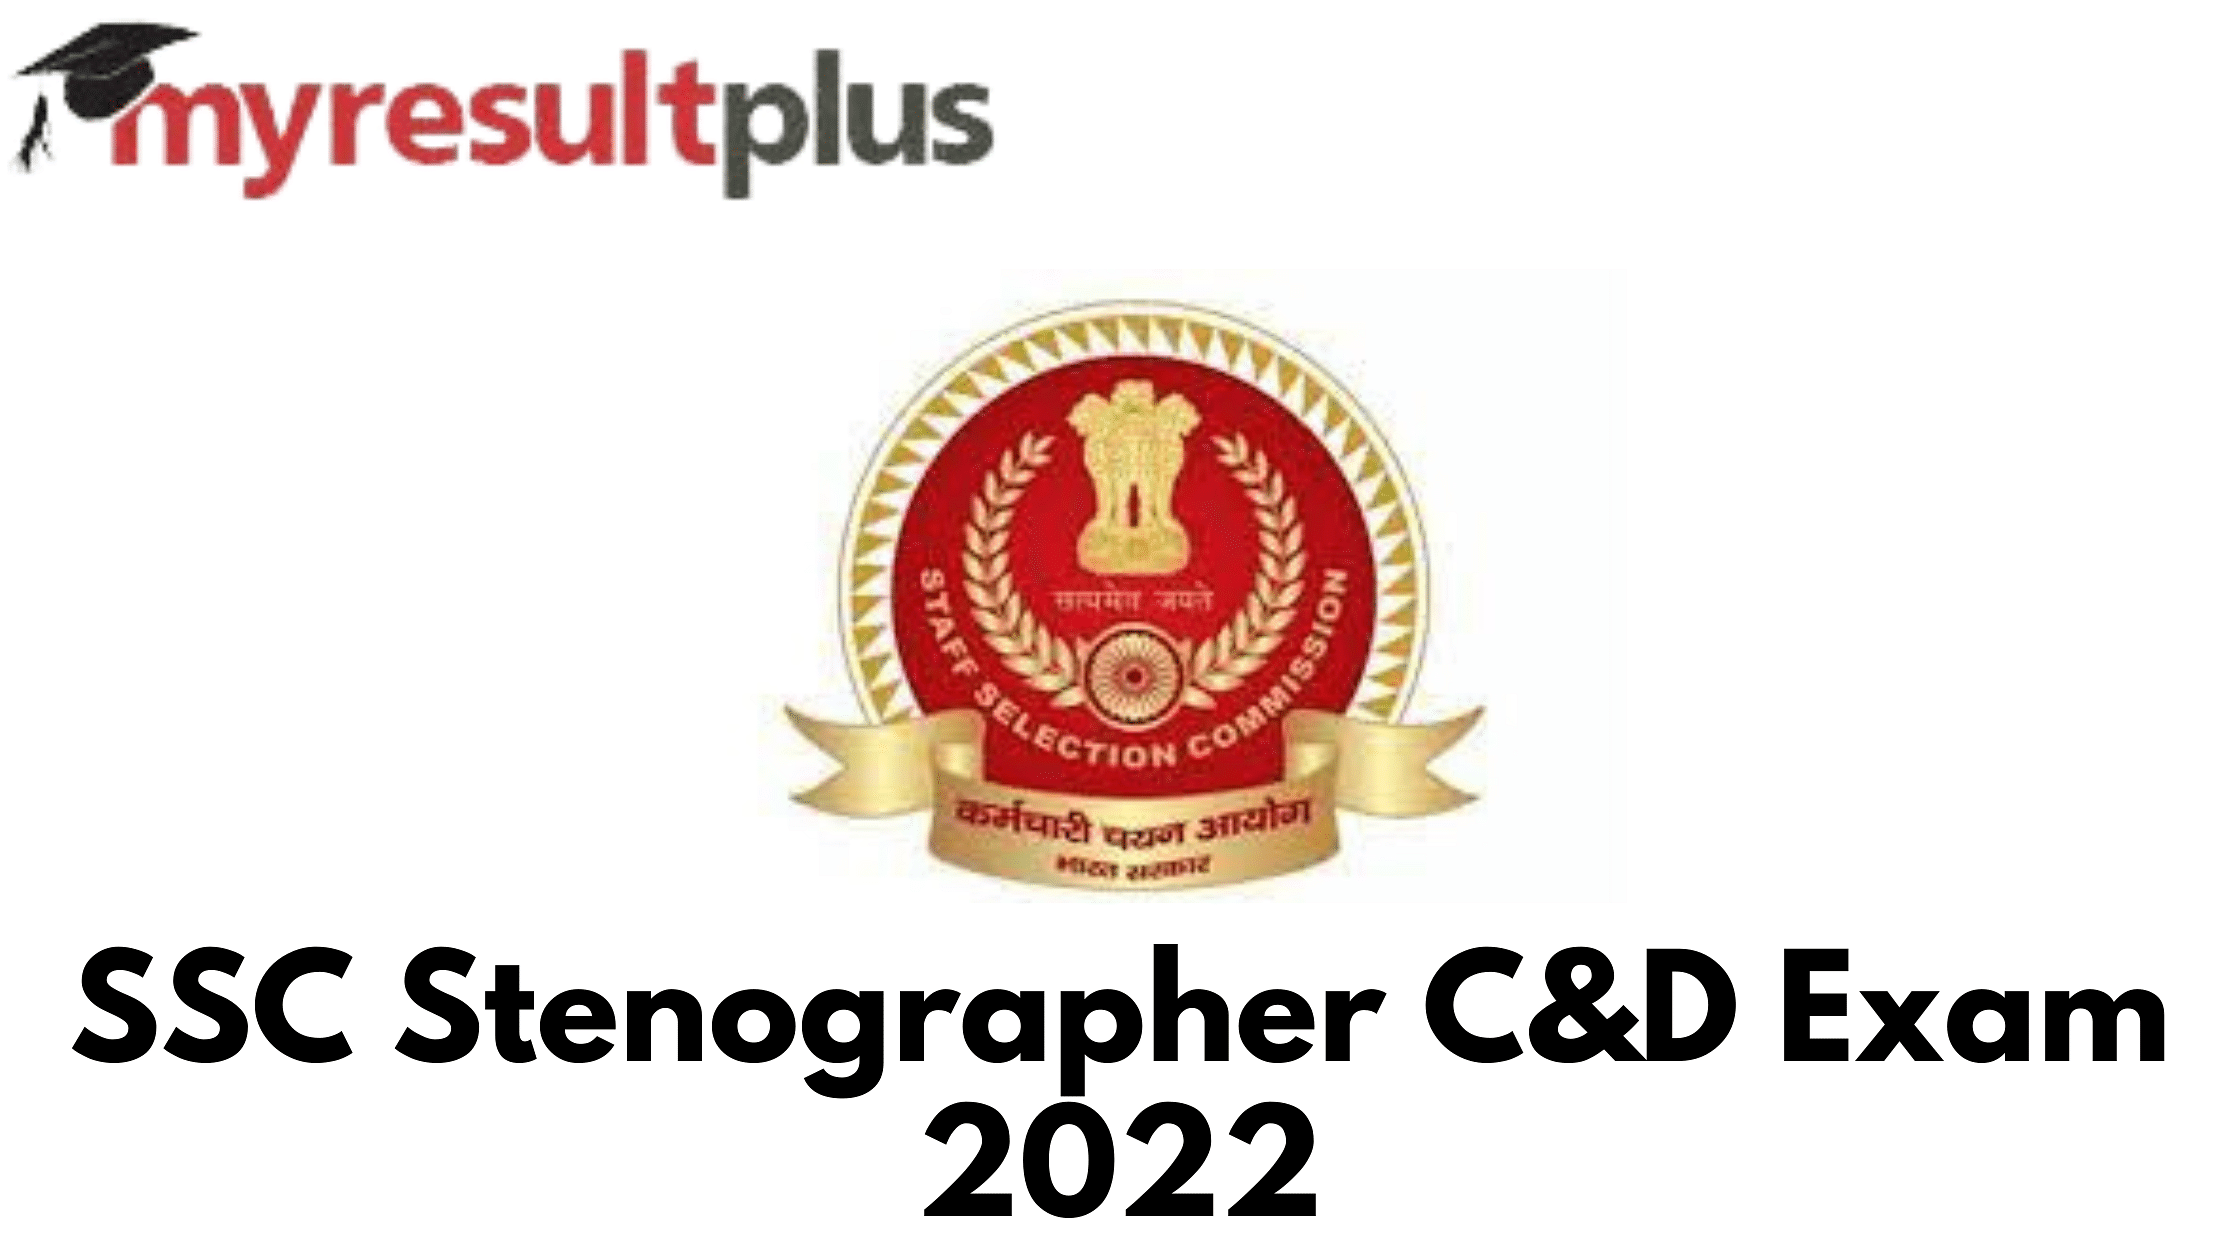 SSC Stenographer Vacancy 2022: Form Released for C&D Exam, Steps to Apply Here